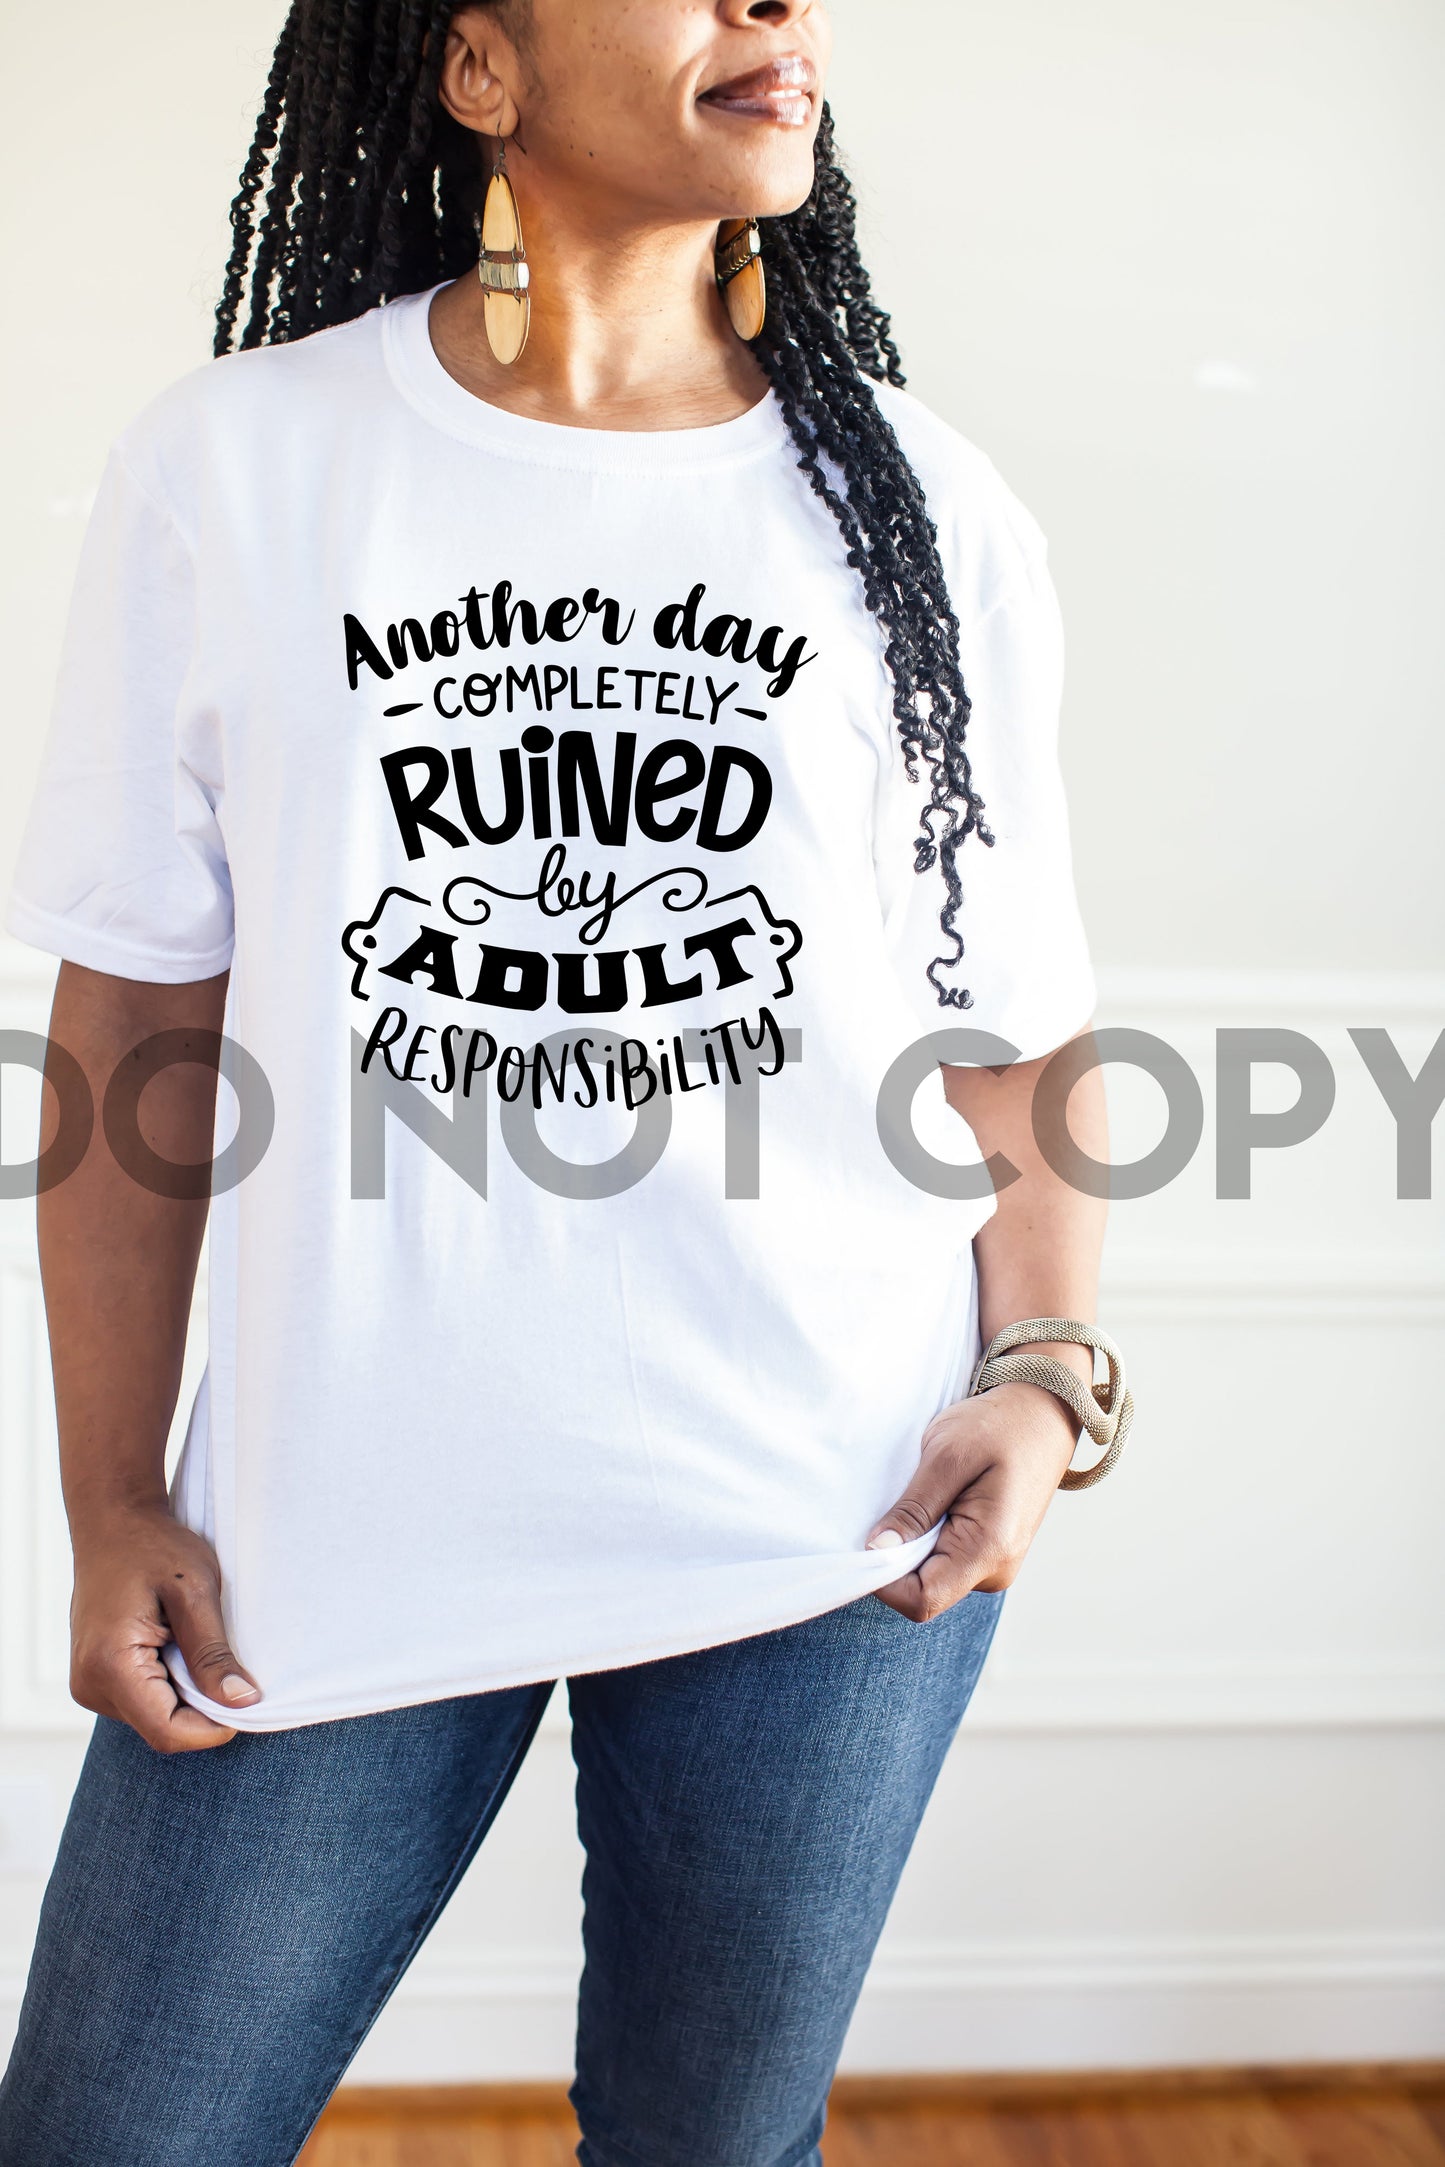 Another day completely ruined by adult responsibility Dream Print or Sublimation Print